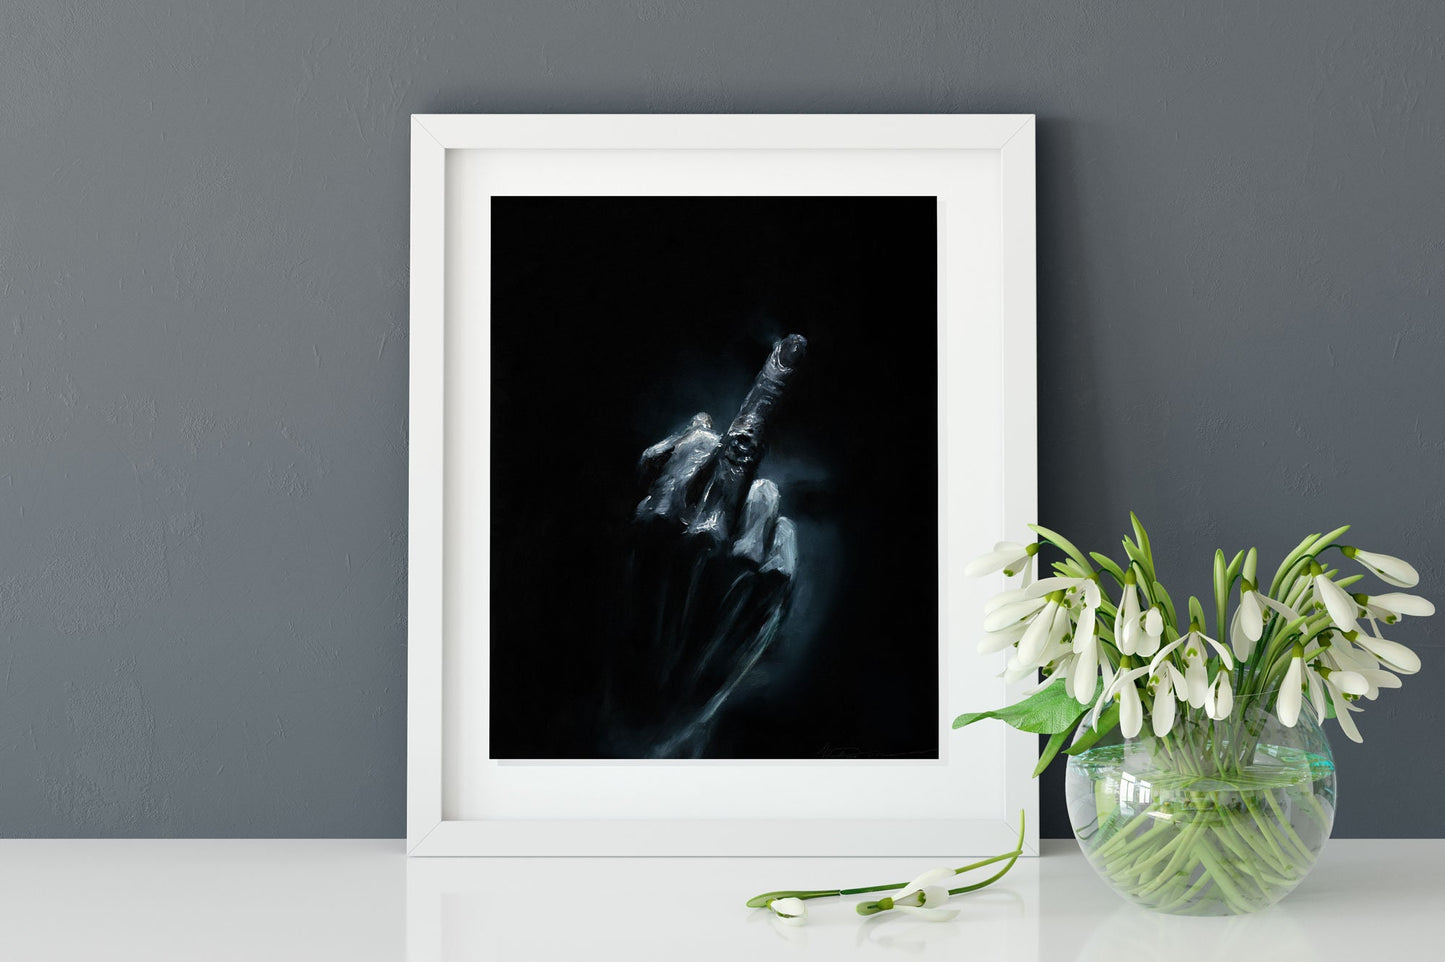 Original Painting, Hand-Painted Oil Painting of Middle Finger, Wall Art, Black and White Art,